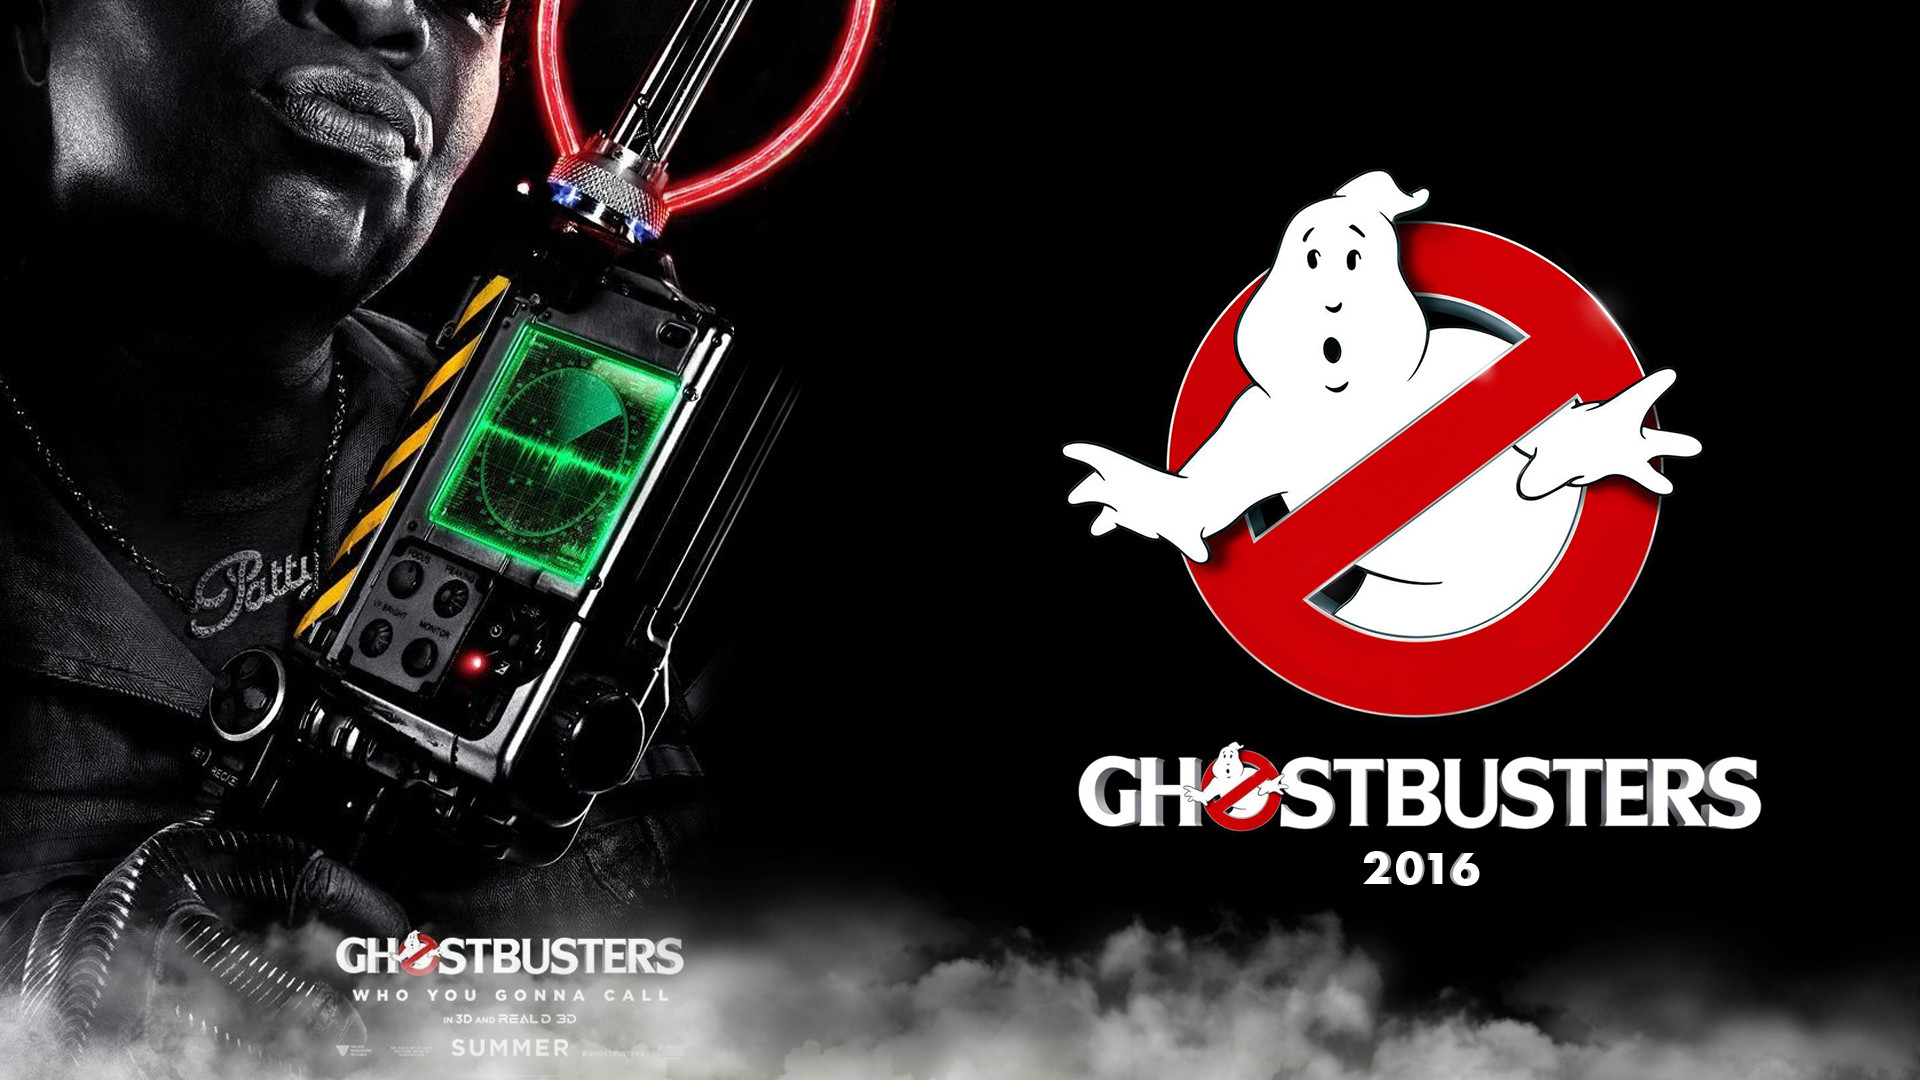 1920x1080 ghostbusters-1